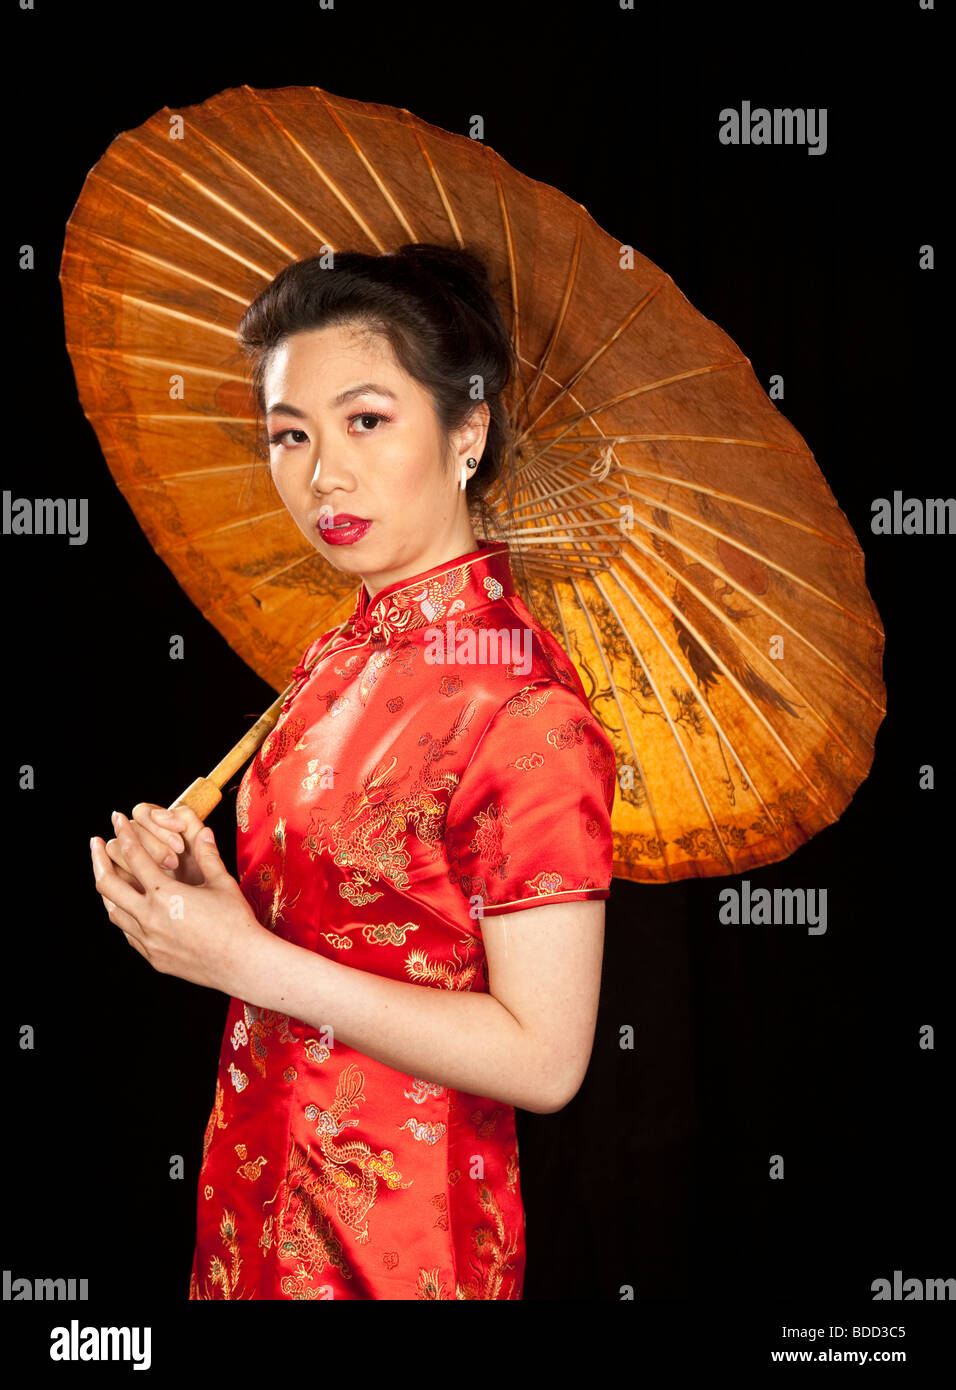 Chinese girl with parasol Stock Photo - Alamy